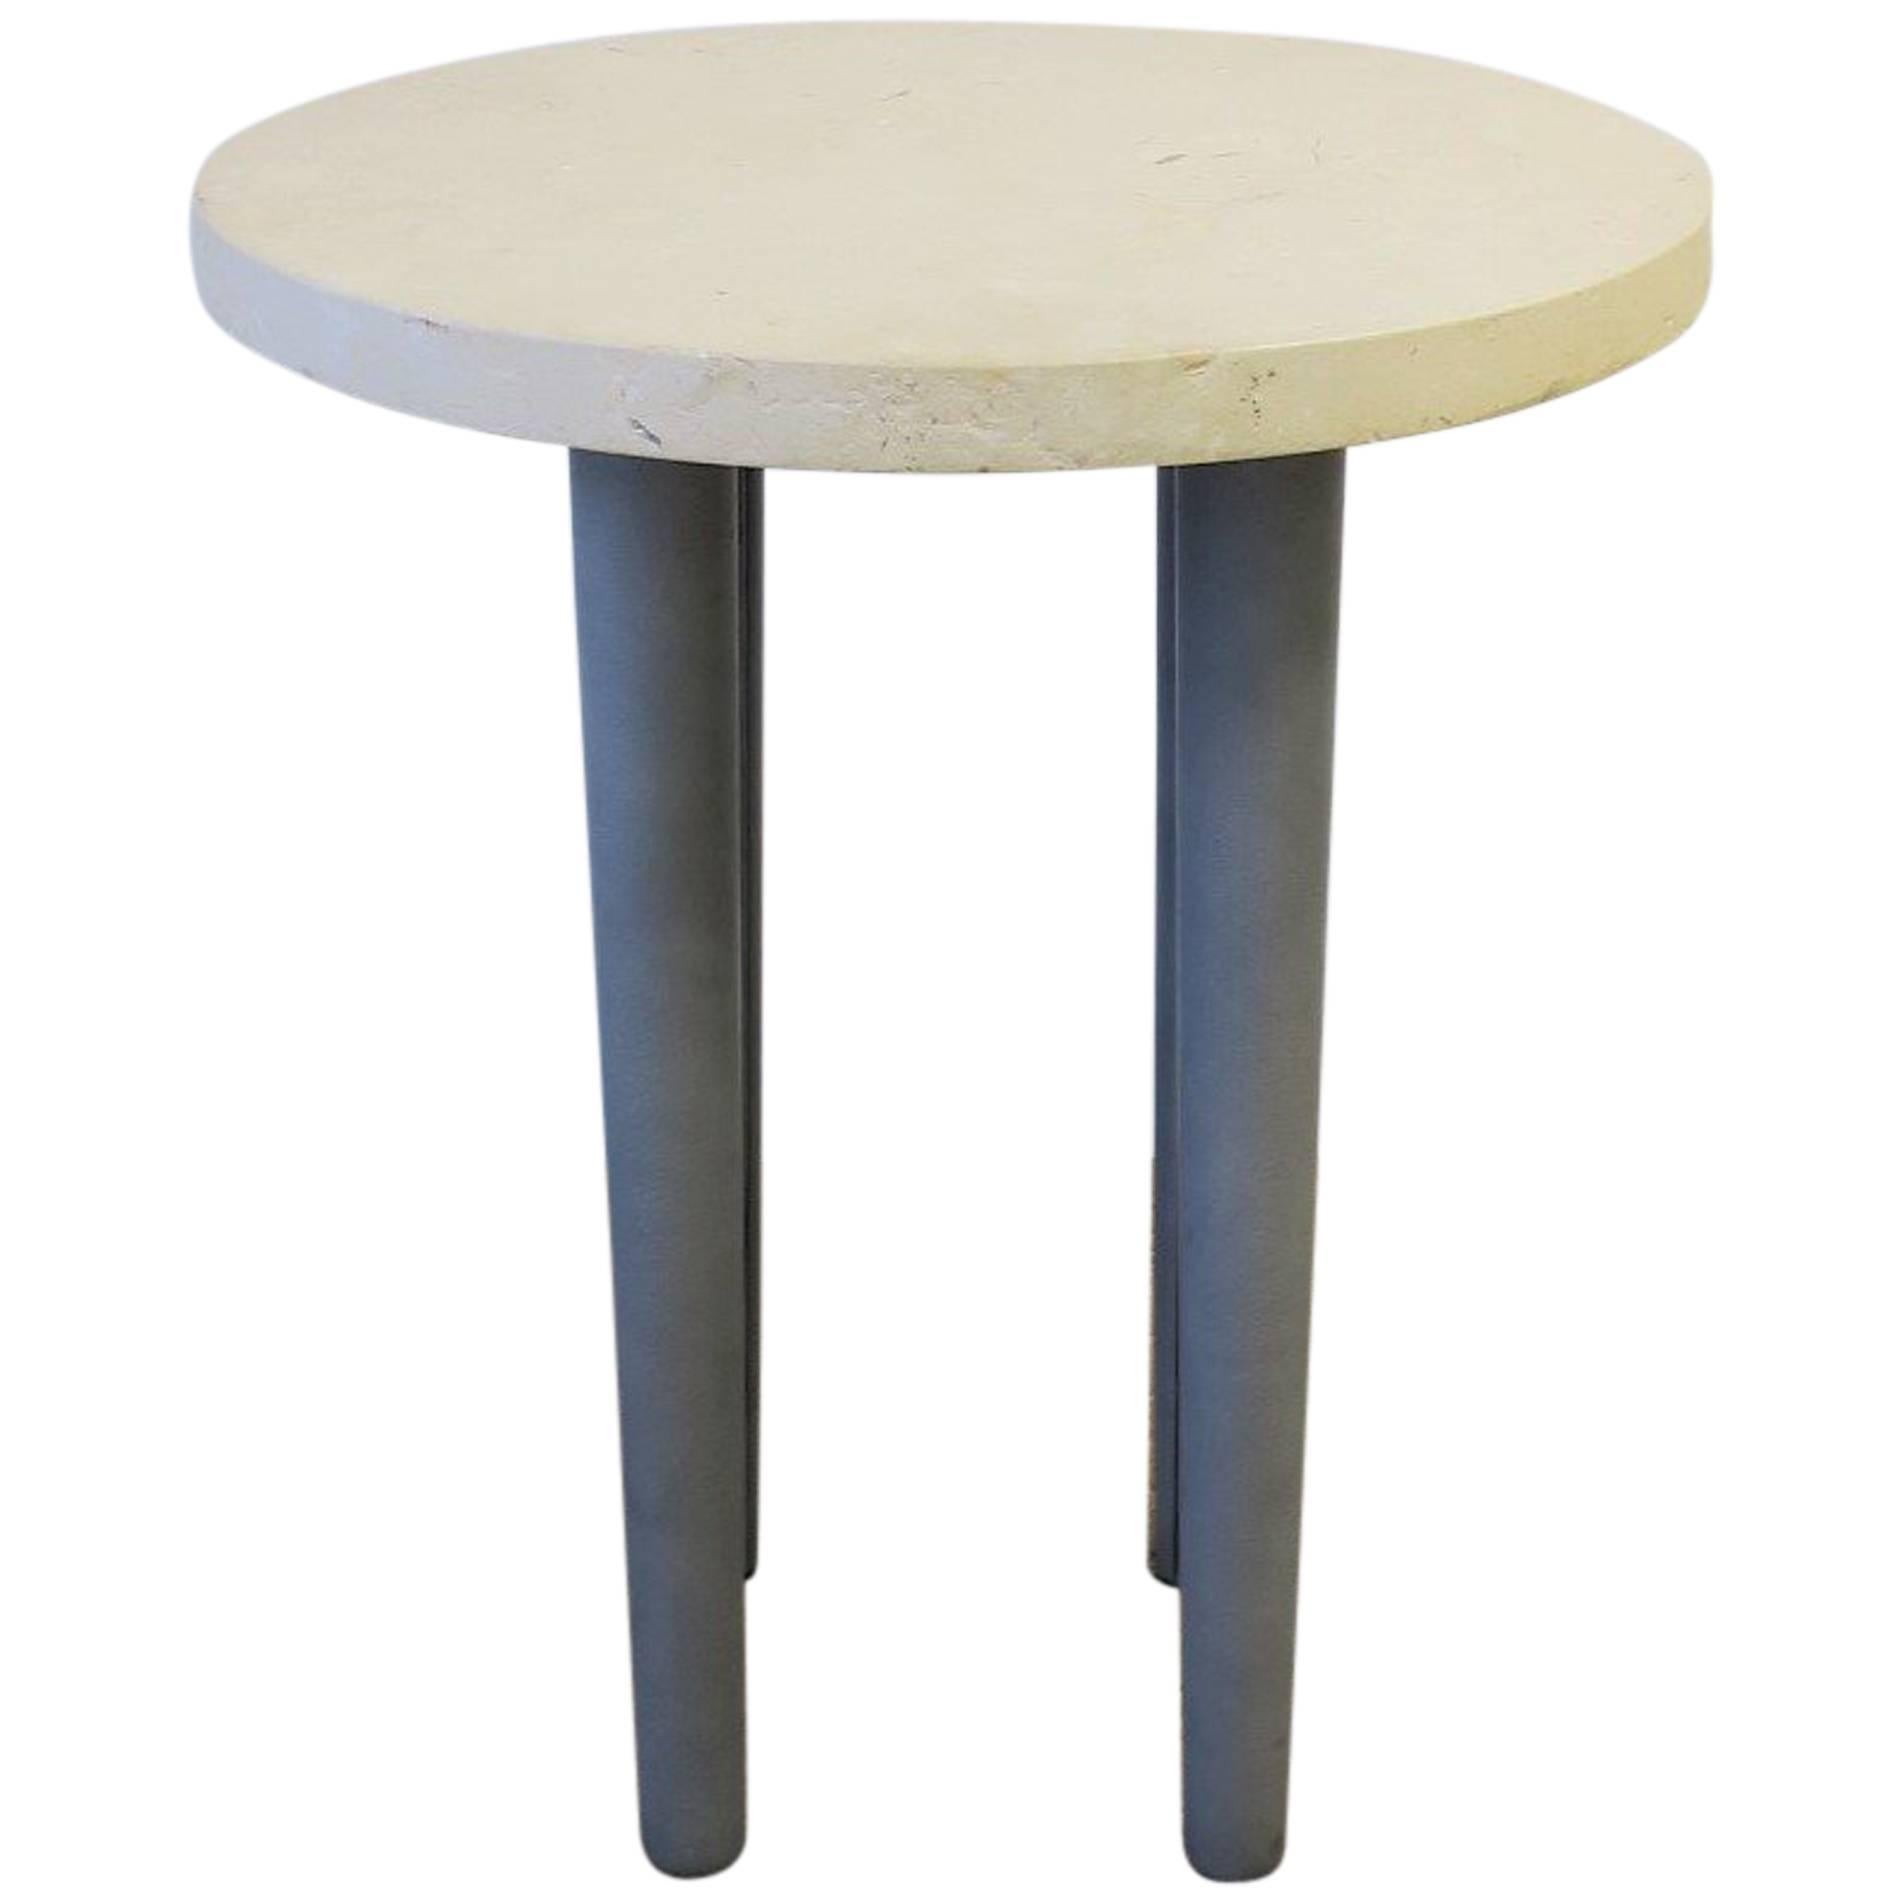 Stone and Leather Postmodern Round Side or Drinks Table